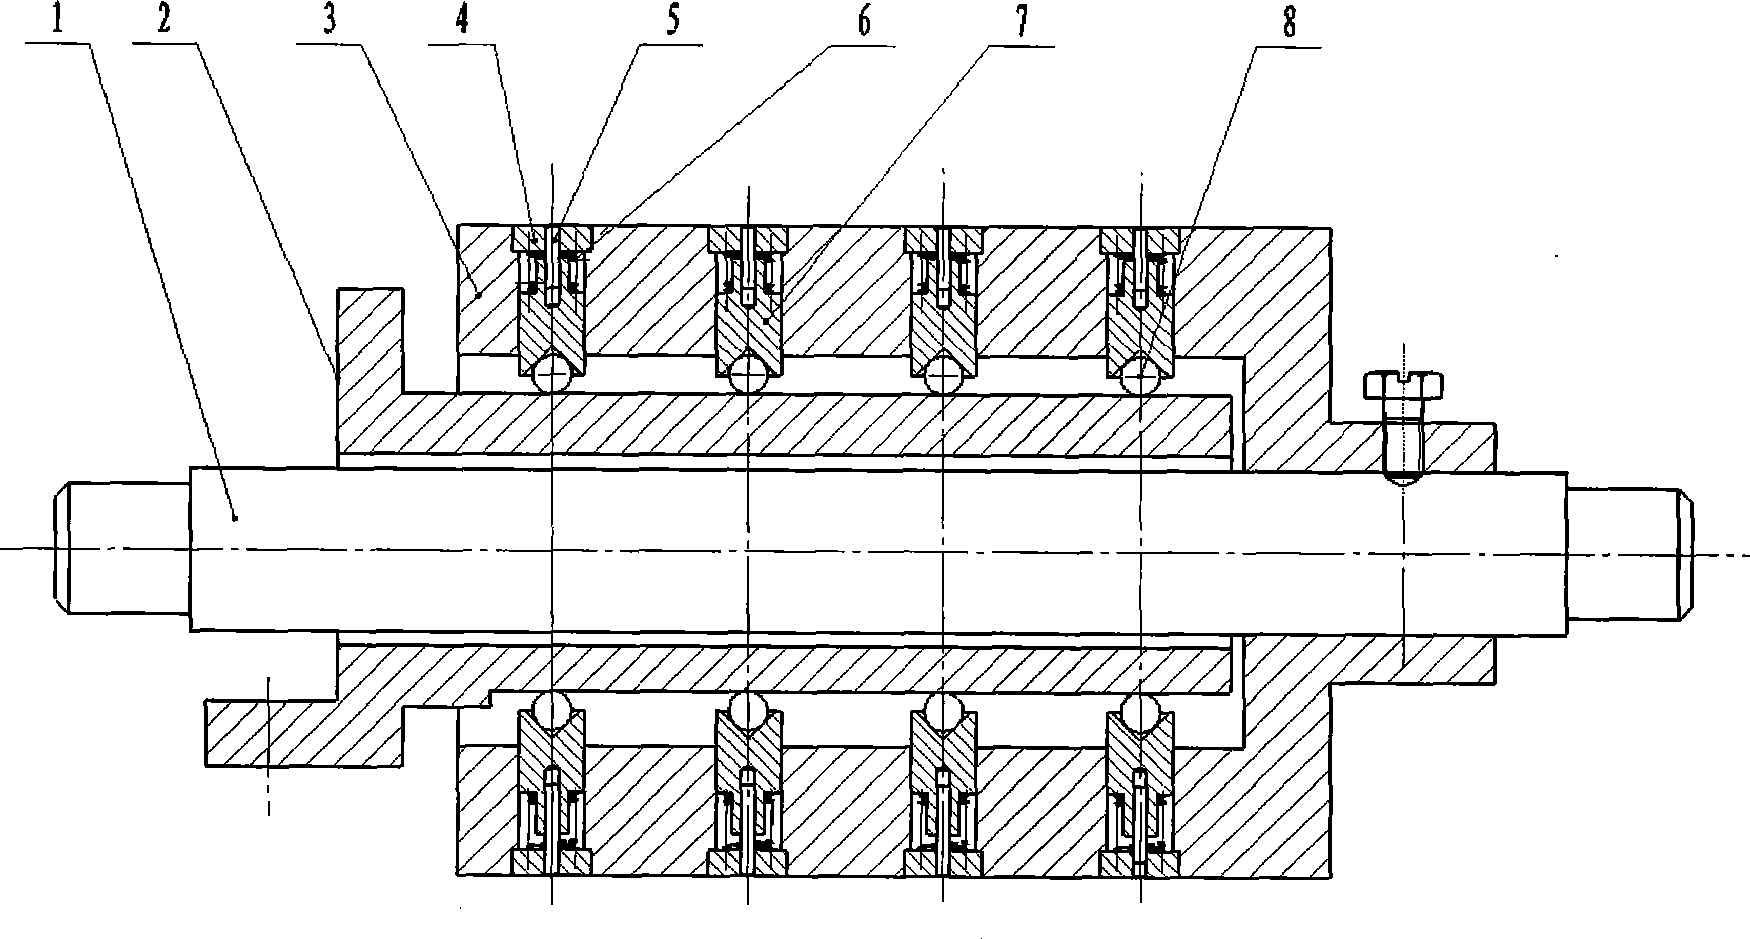 Permanent-magnet magnetic-attraction precision seeding device